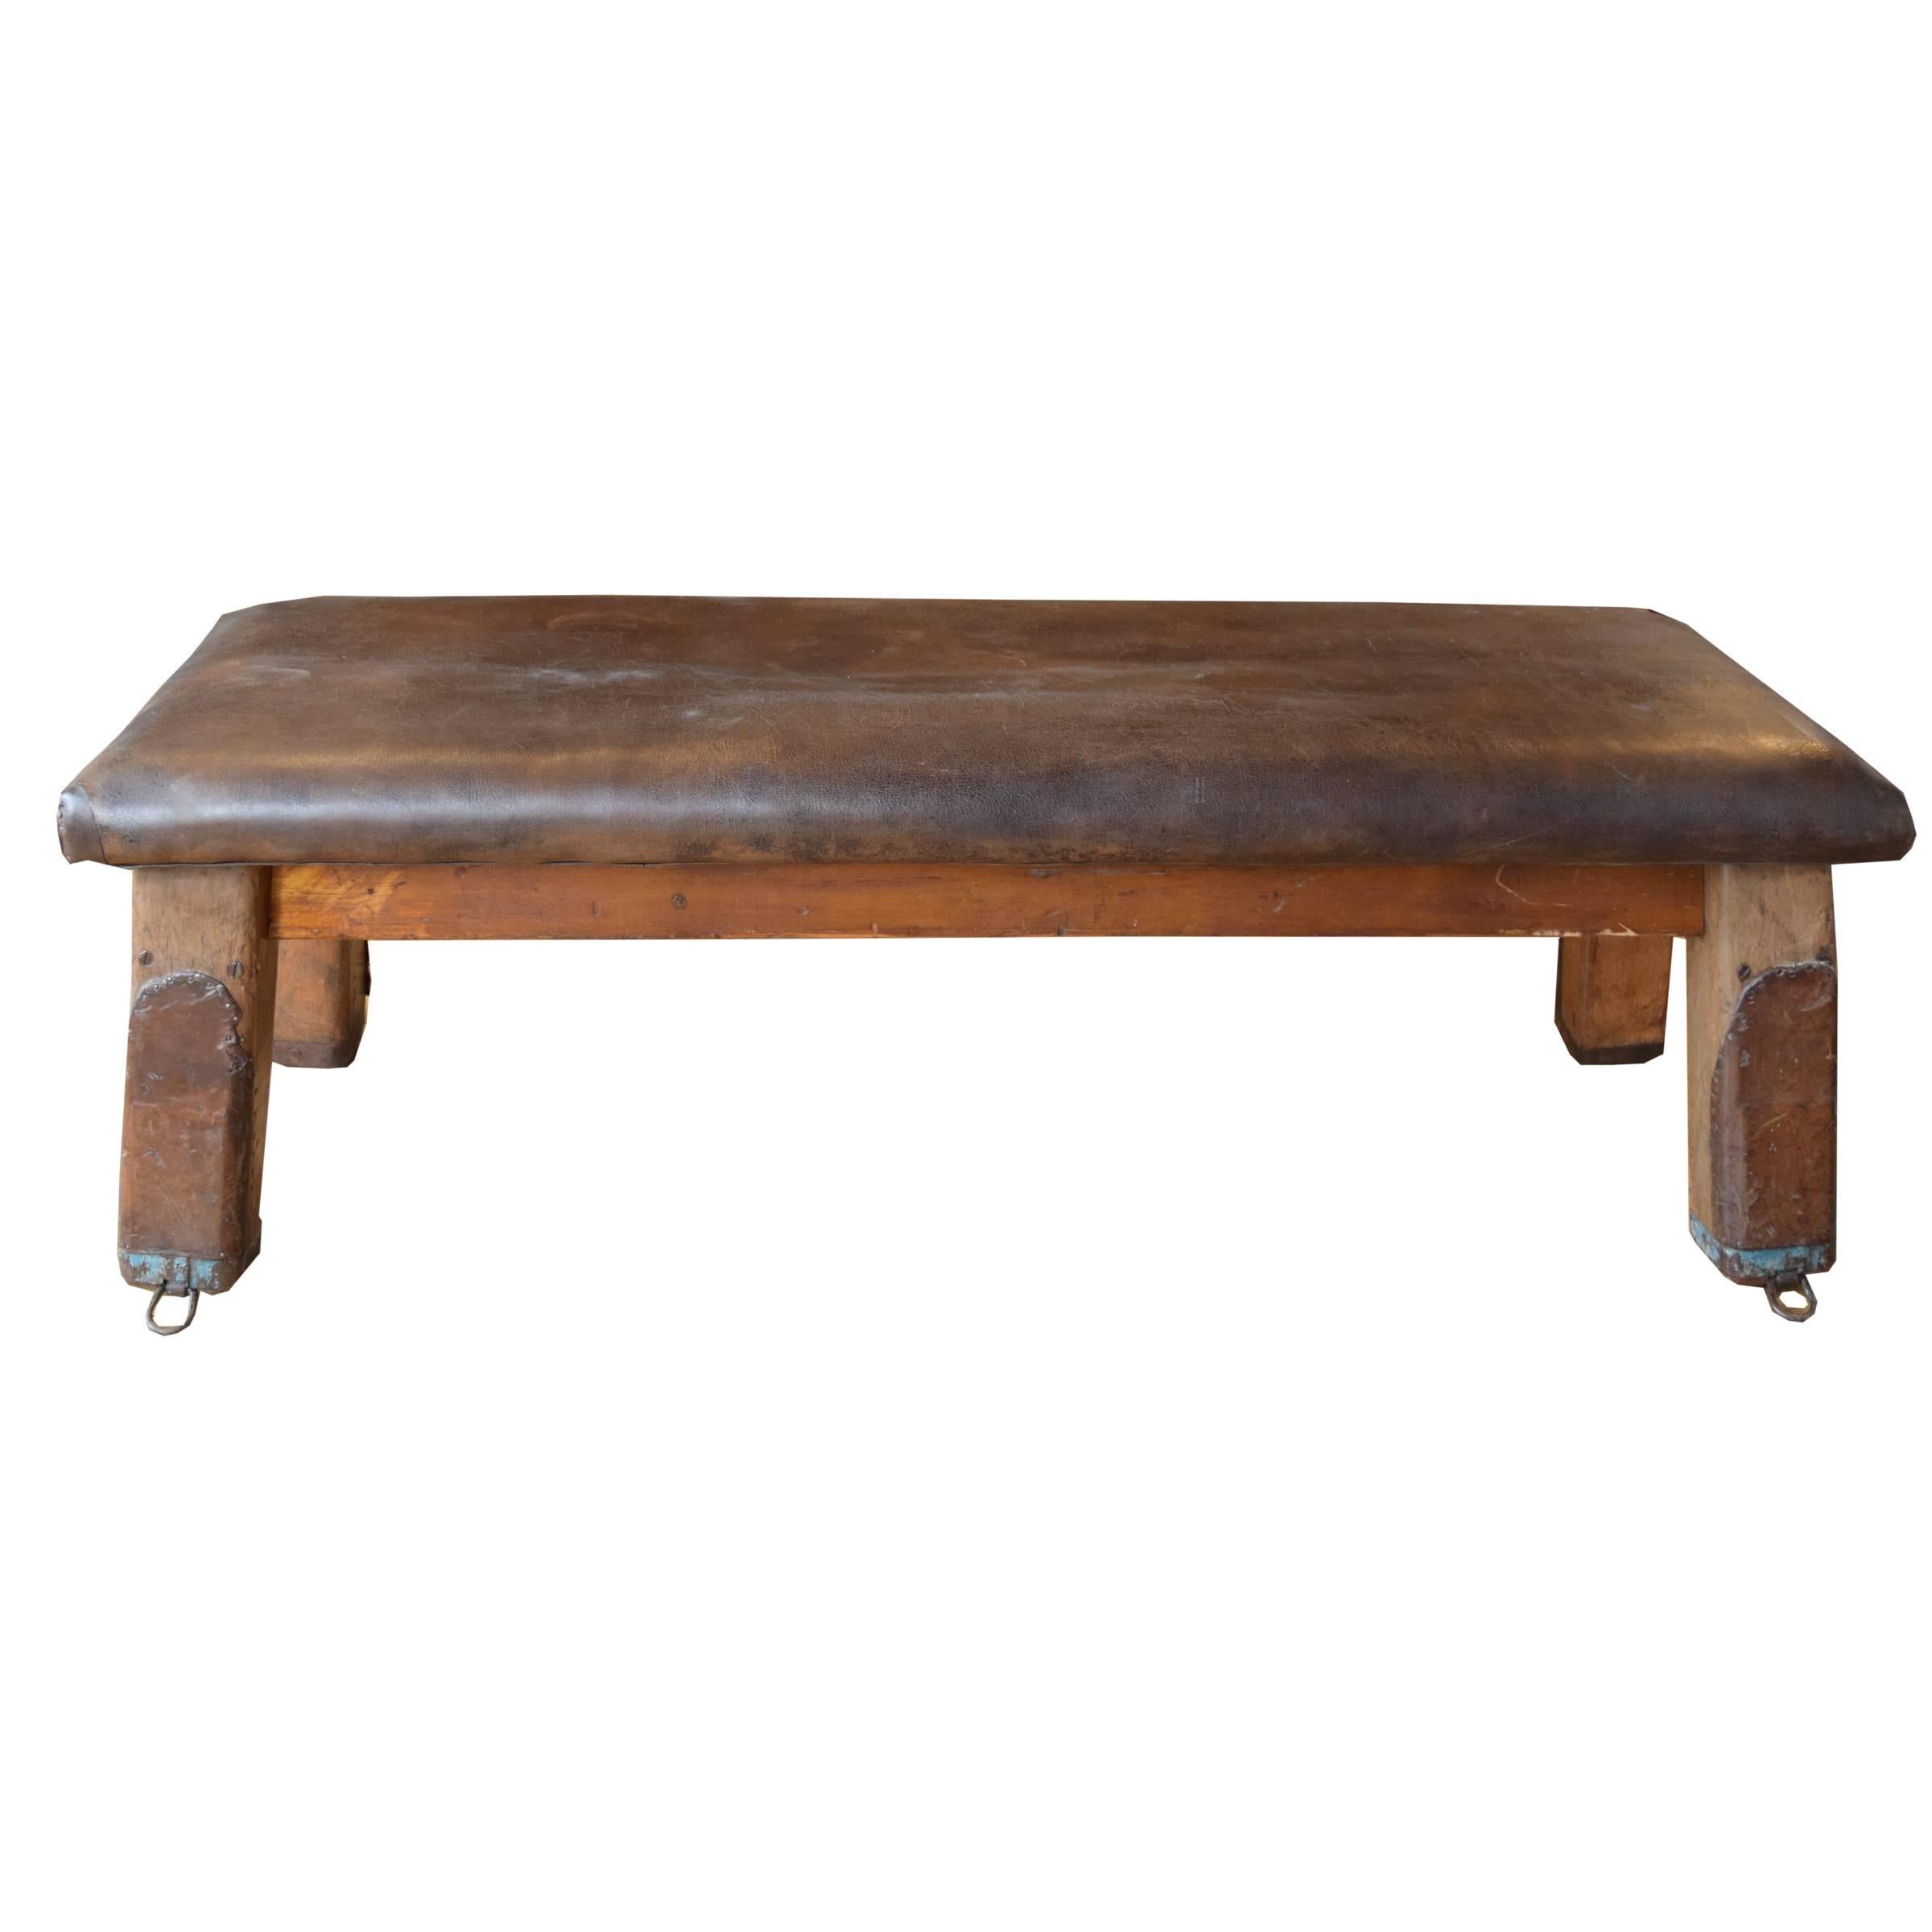 Wood and Leather Vaulting Table